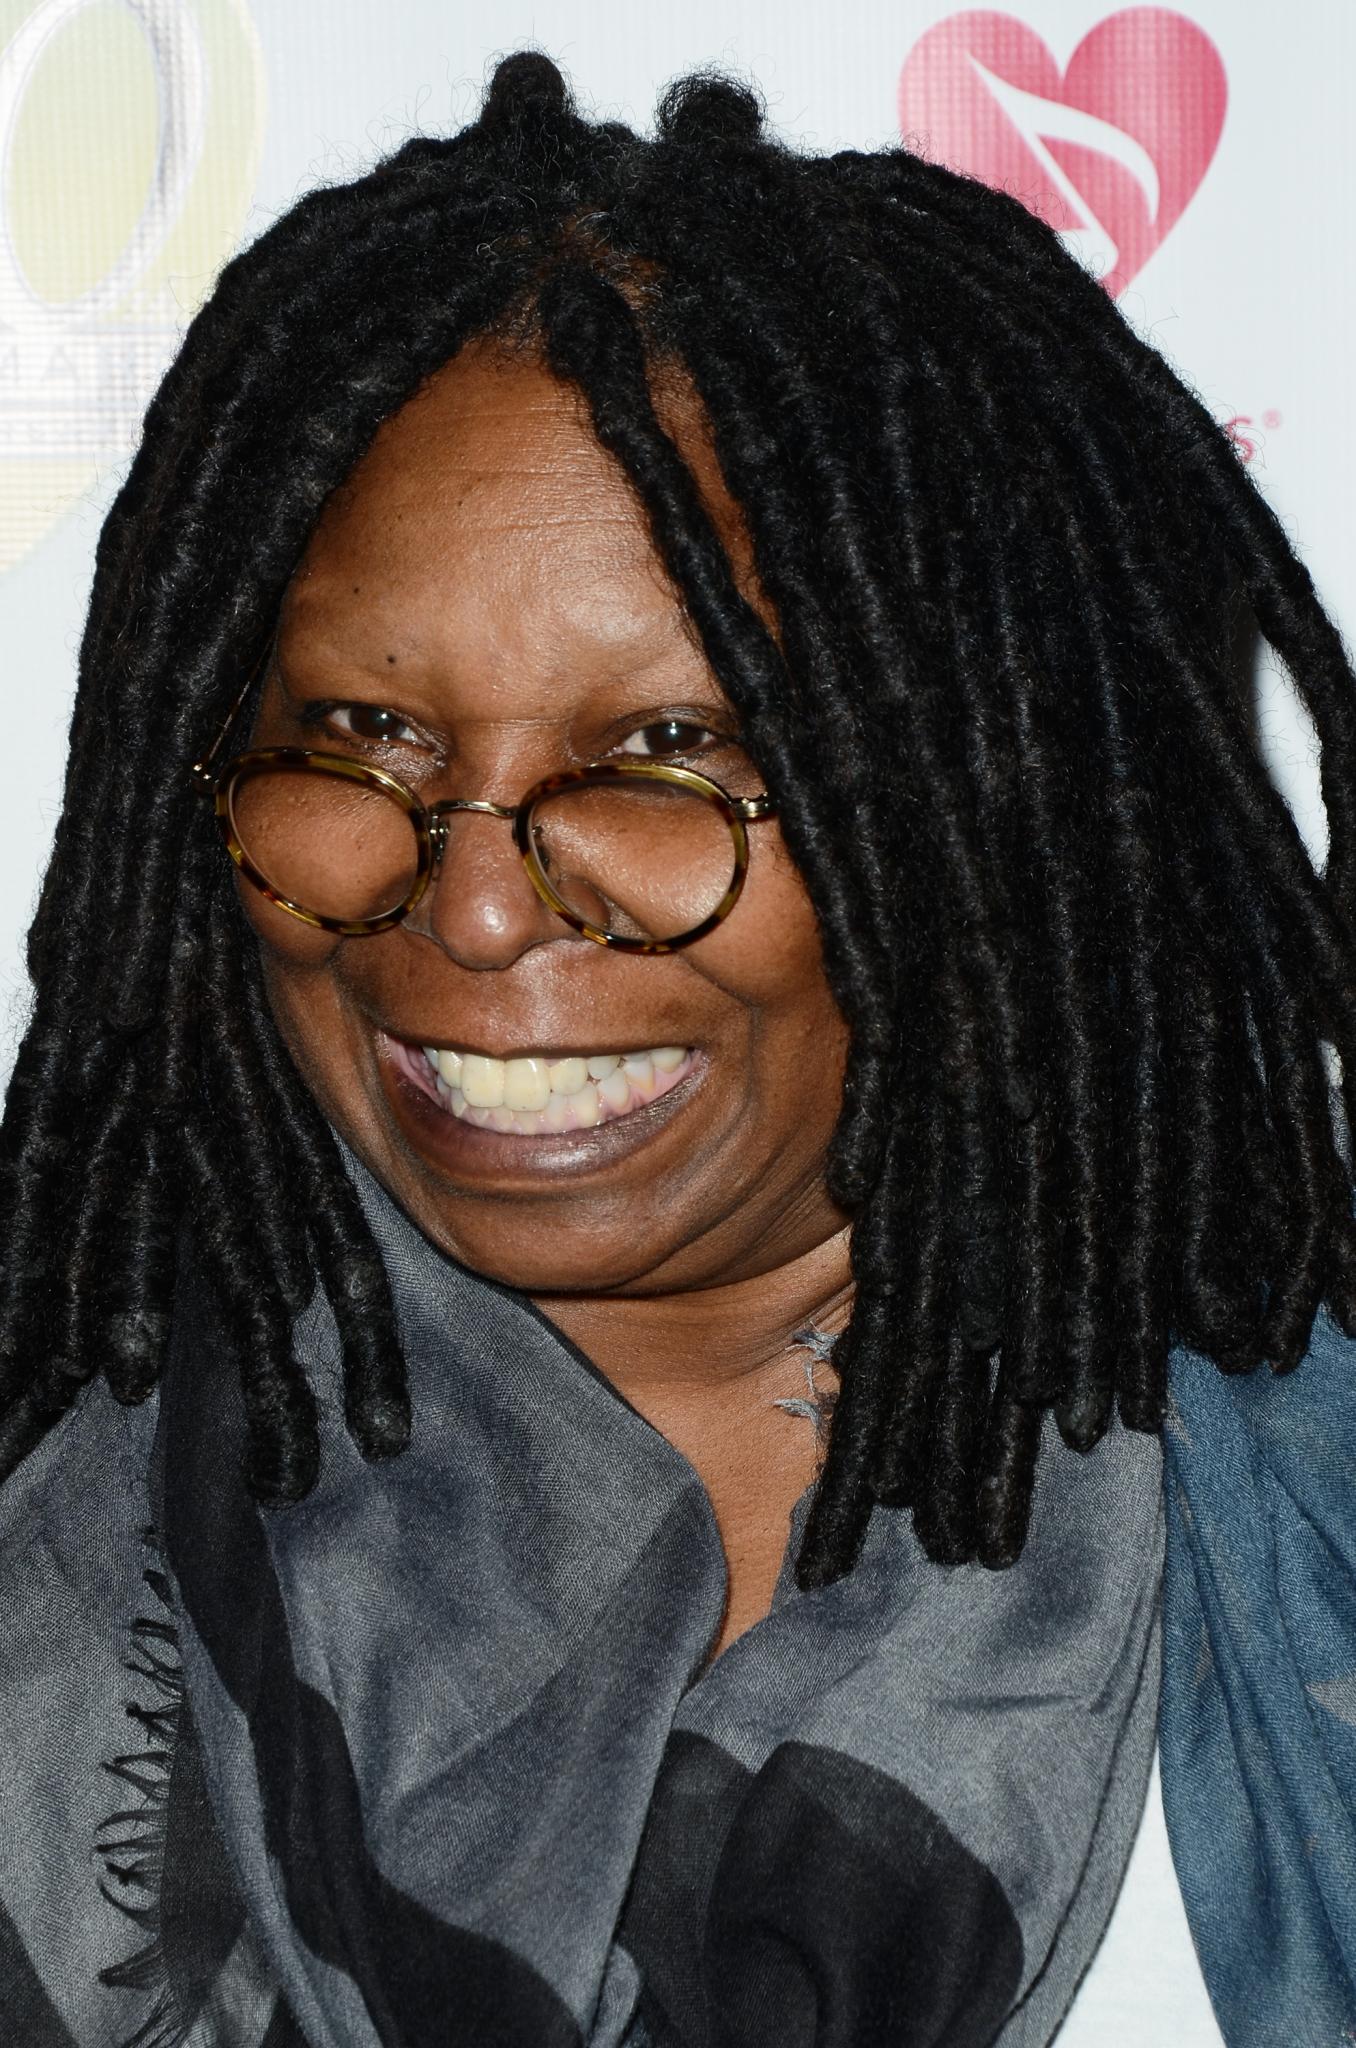 CBS to Air Live Event Marking Civil Rights Act Anniversary With Whoopi Goldberg